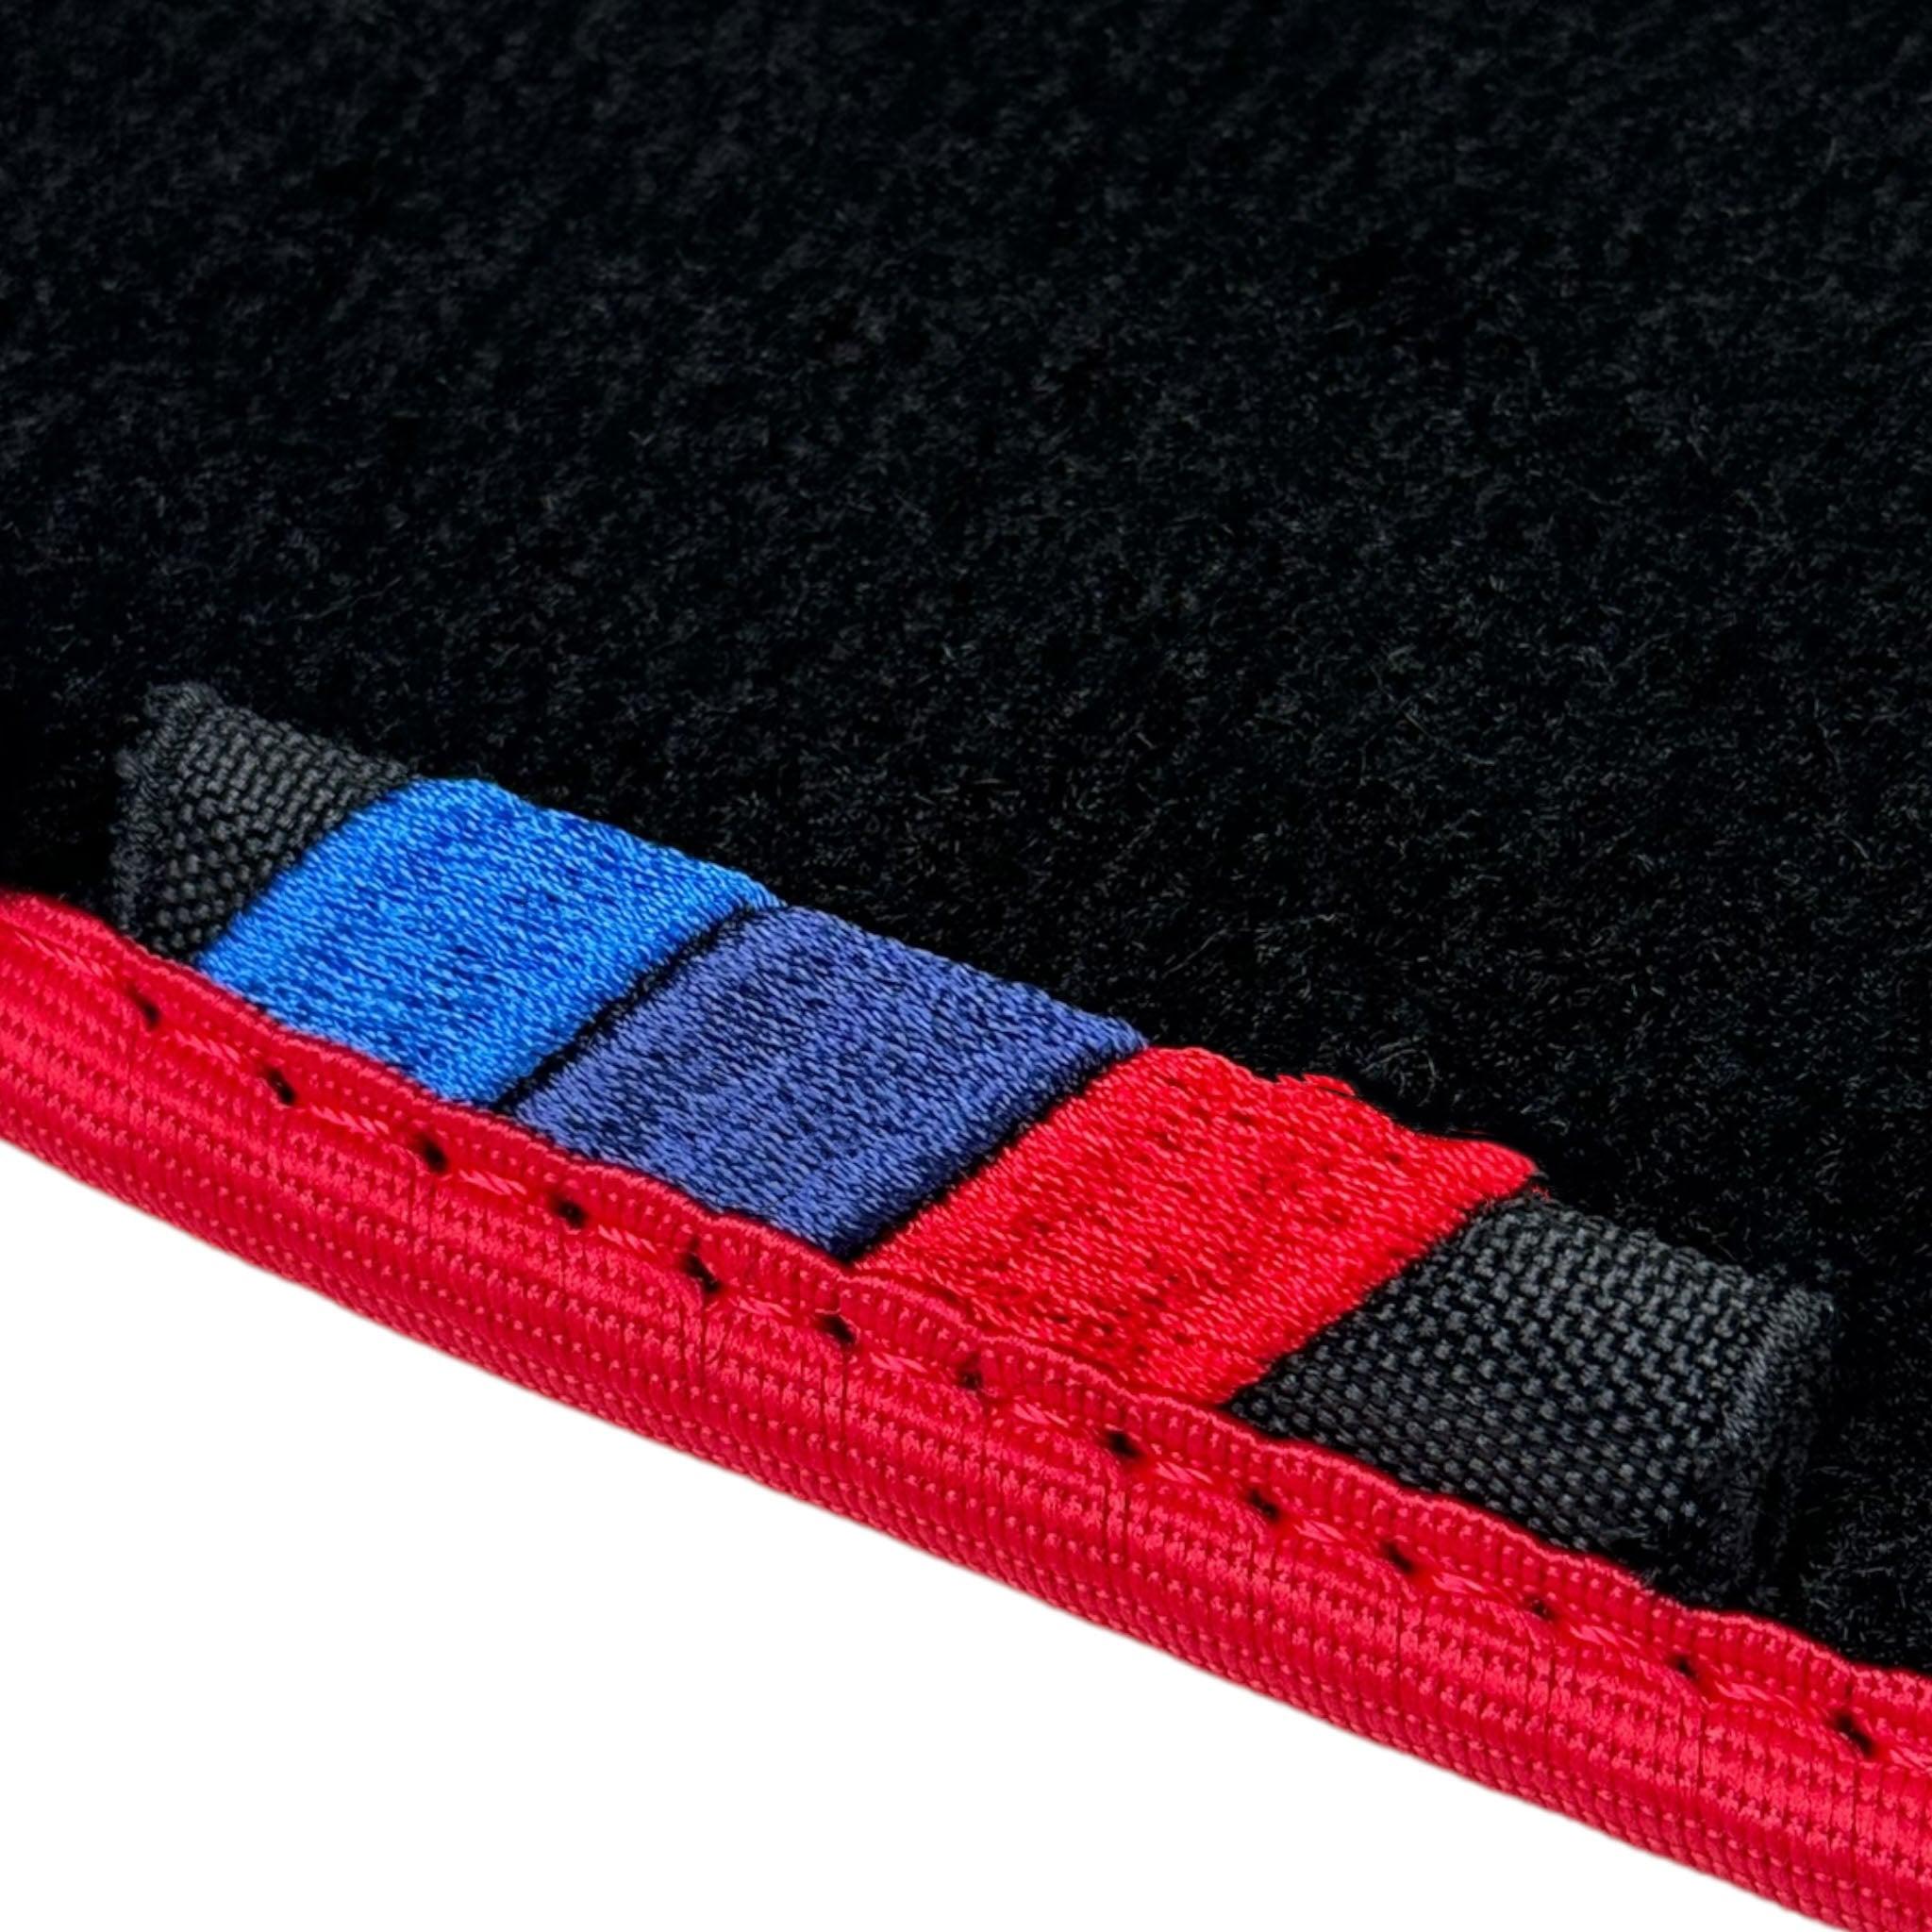 Black Floor Mats For BMW M4 G82 Coupe | Red Trim